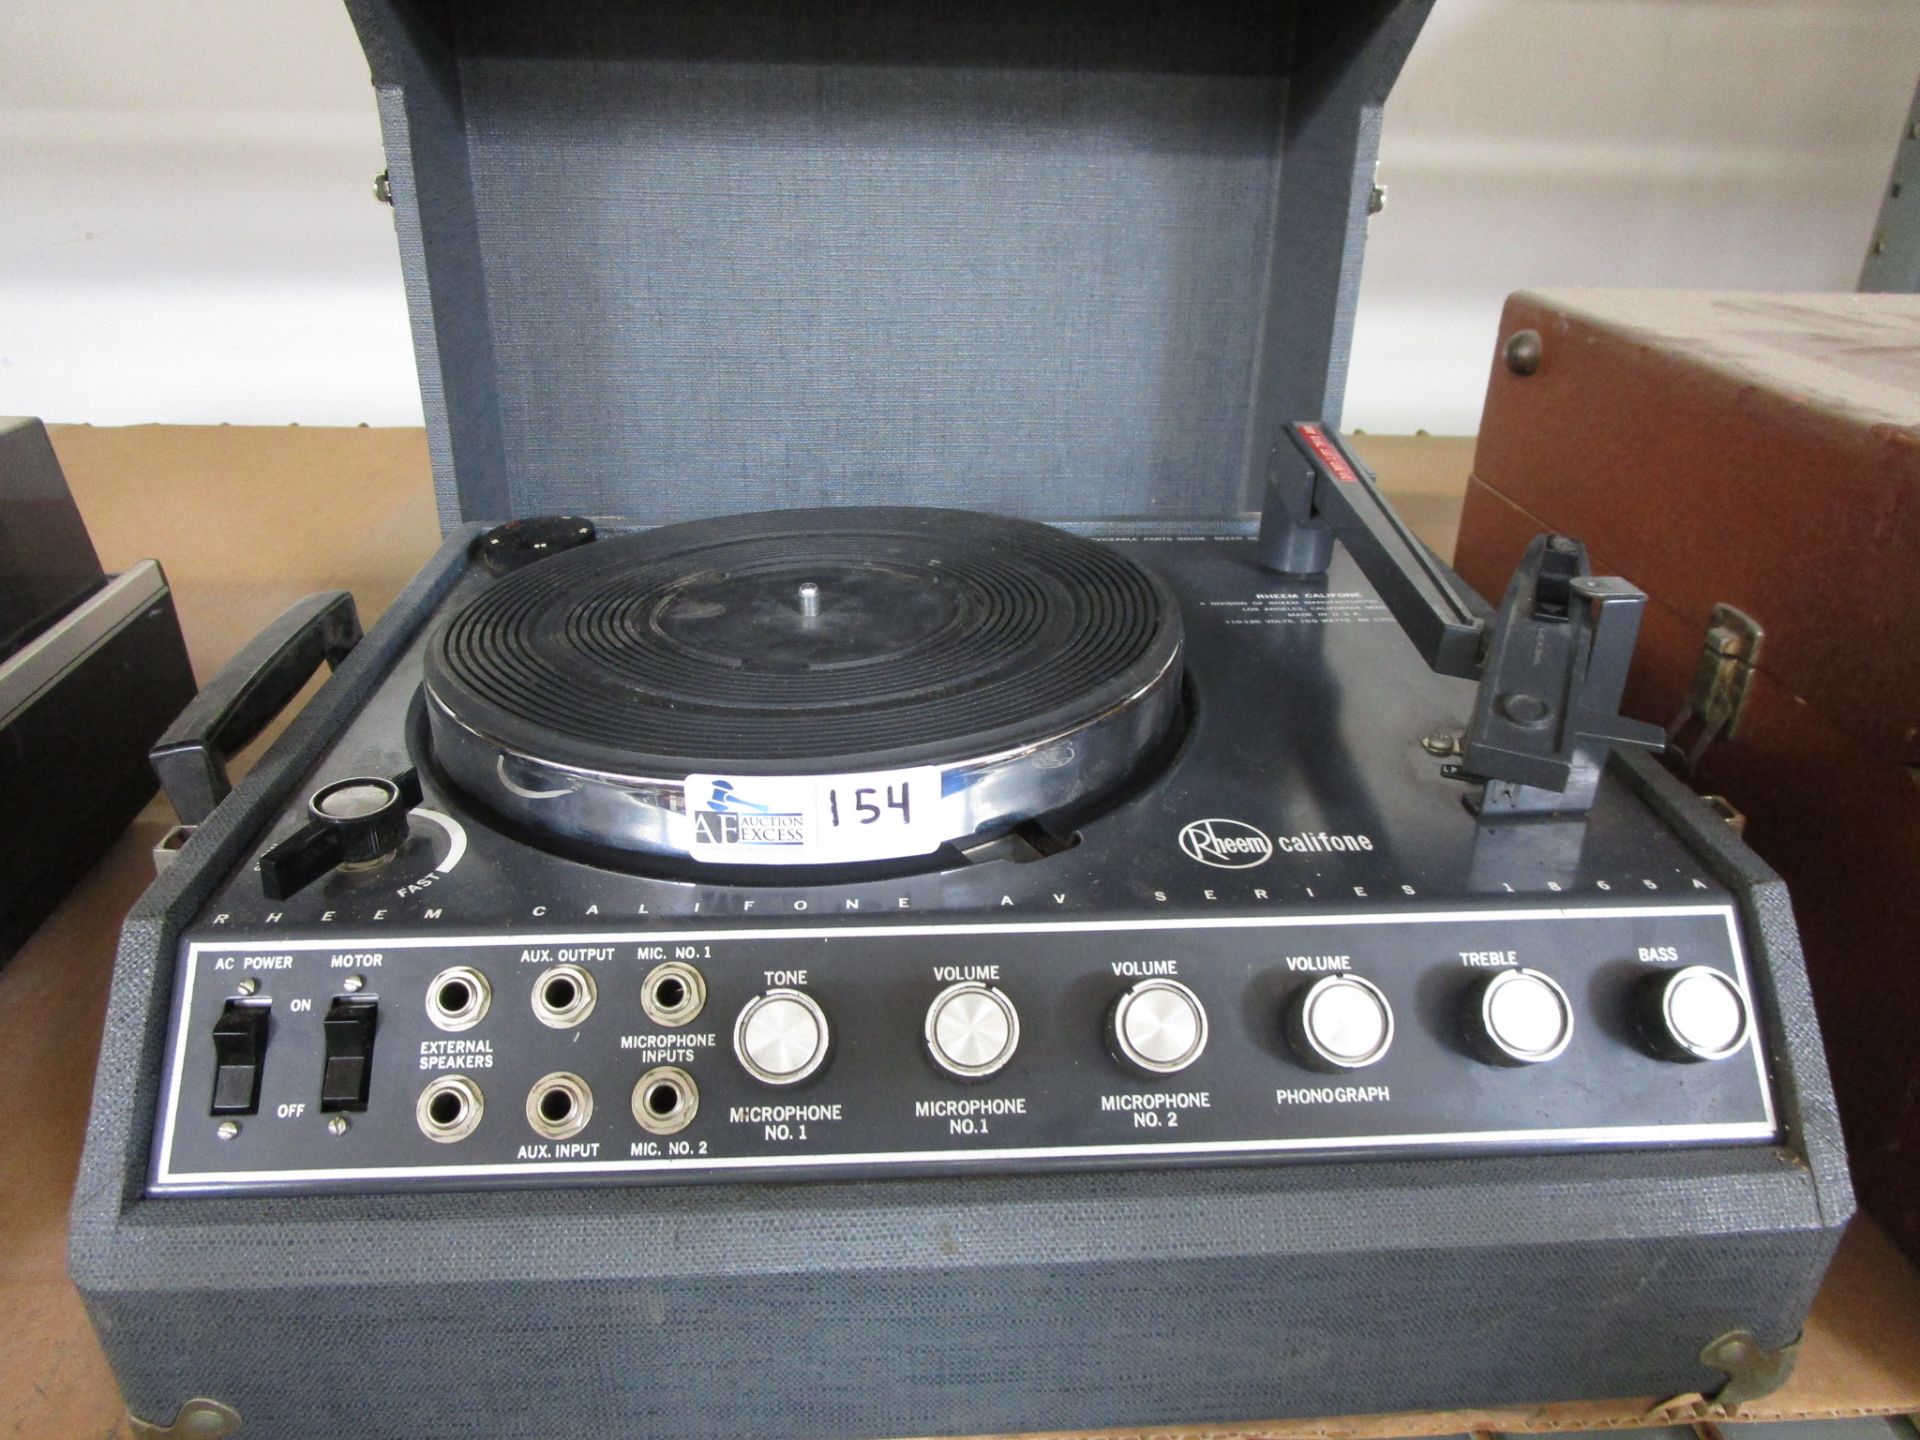 CALIPHONE RHEEM 1865A PORTABLE RECORD PLAYER IN CARRYING CASE